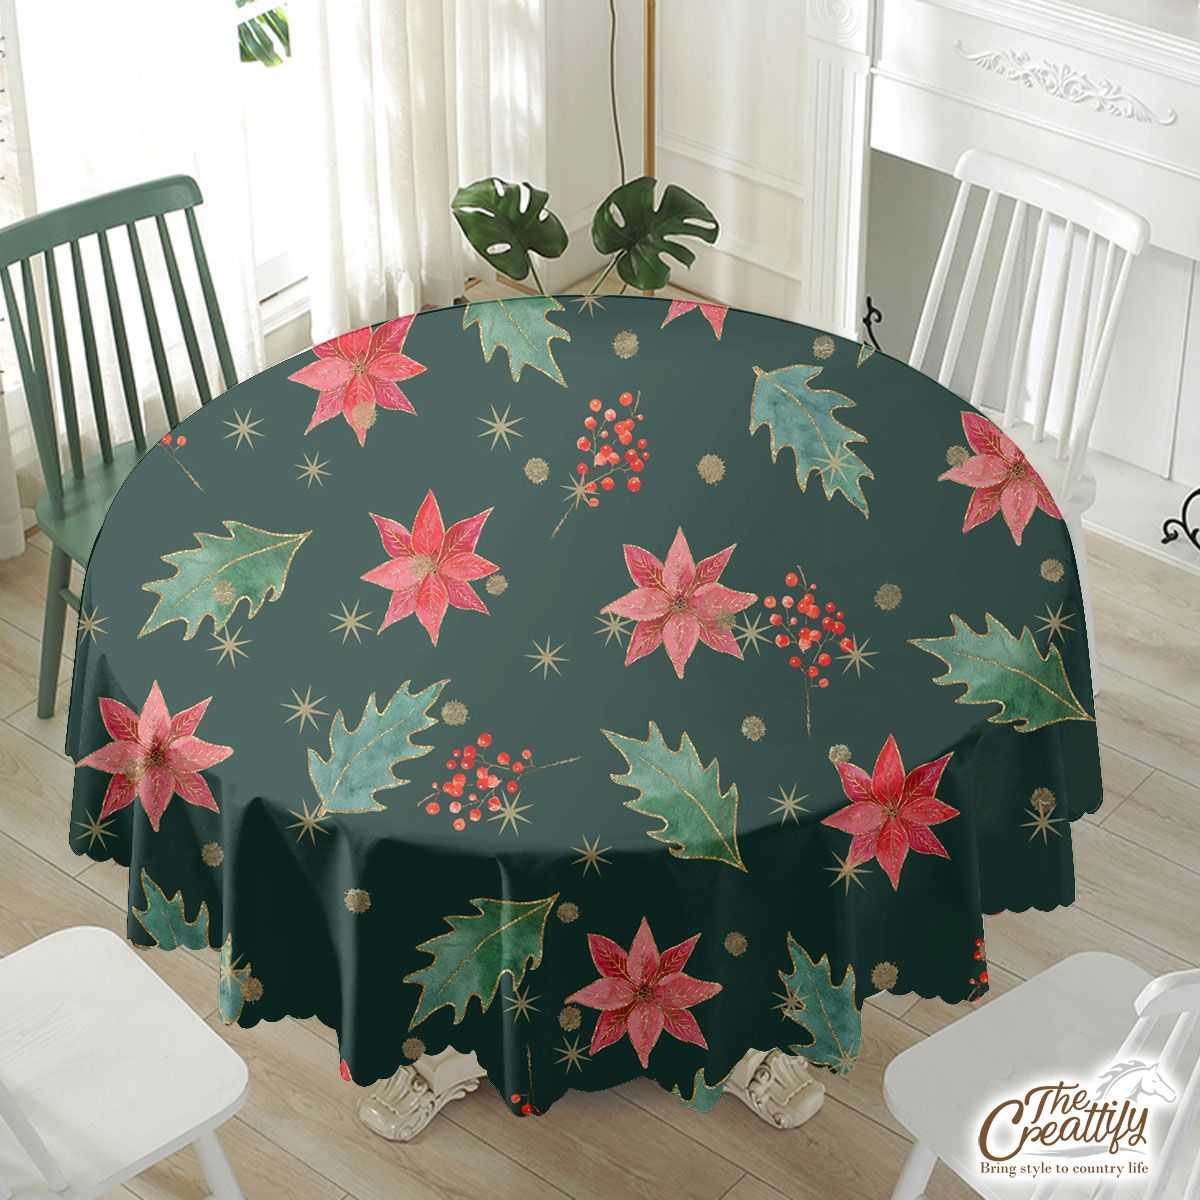 Poinsettias For Christmas And Holly Leaf Pattern Waterproof Tablecloth